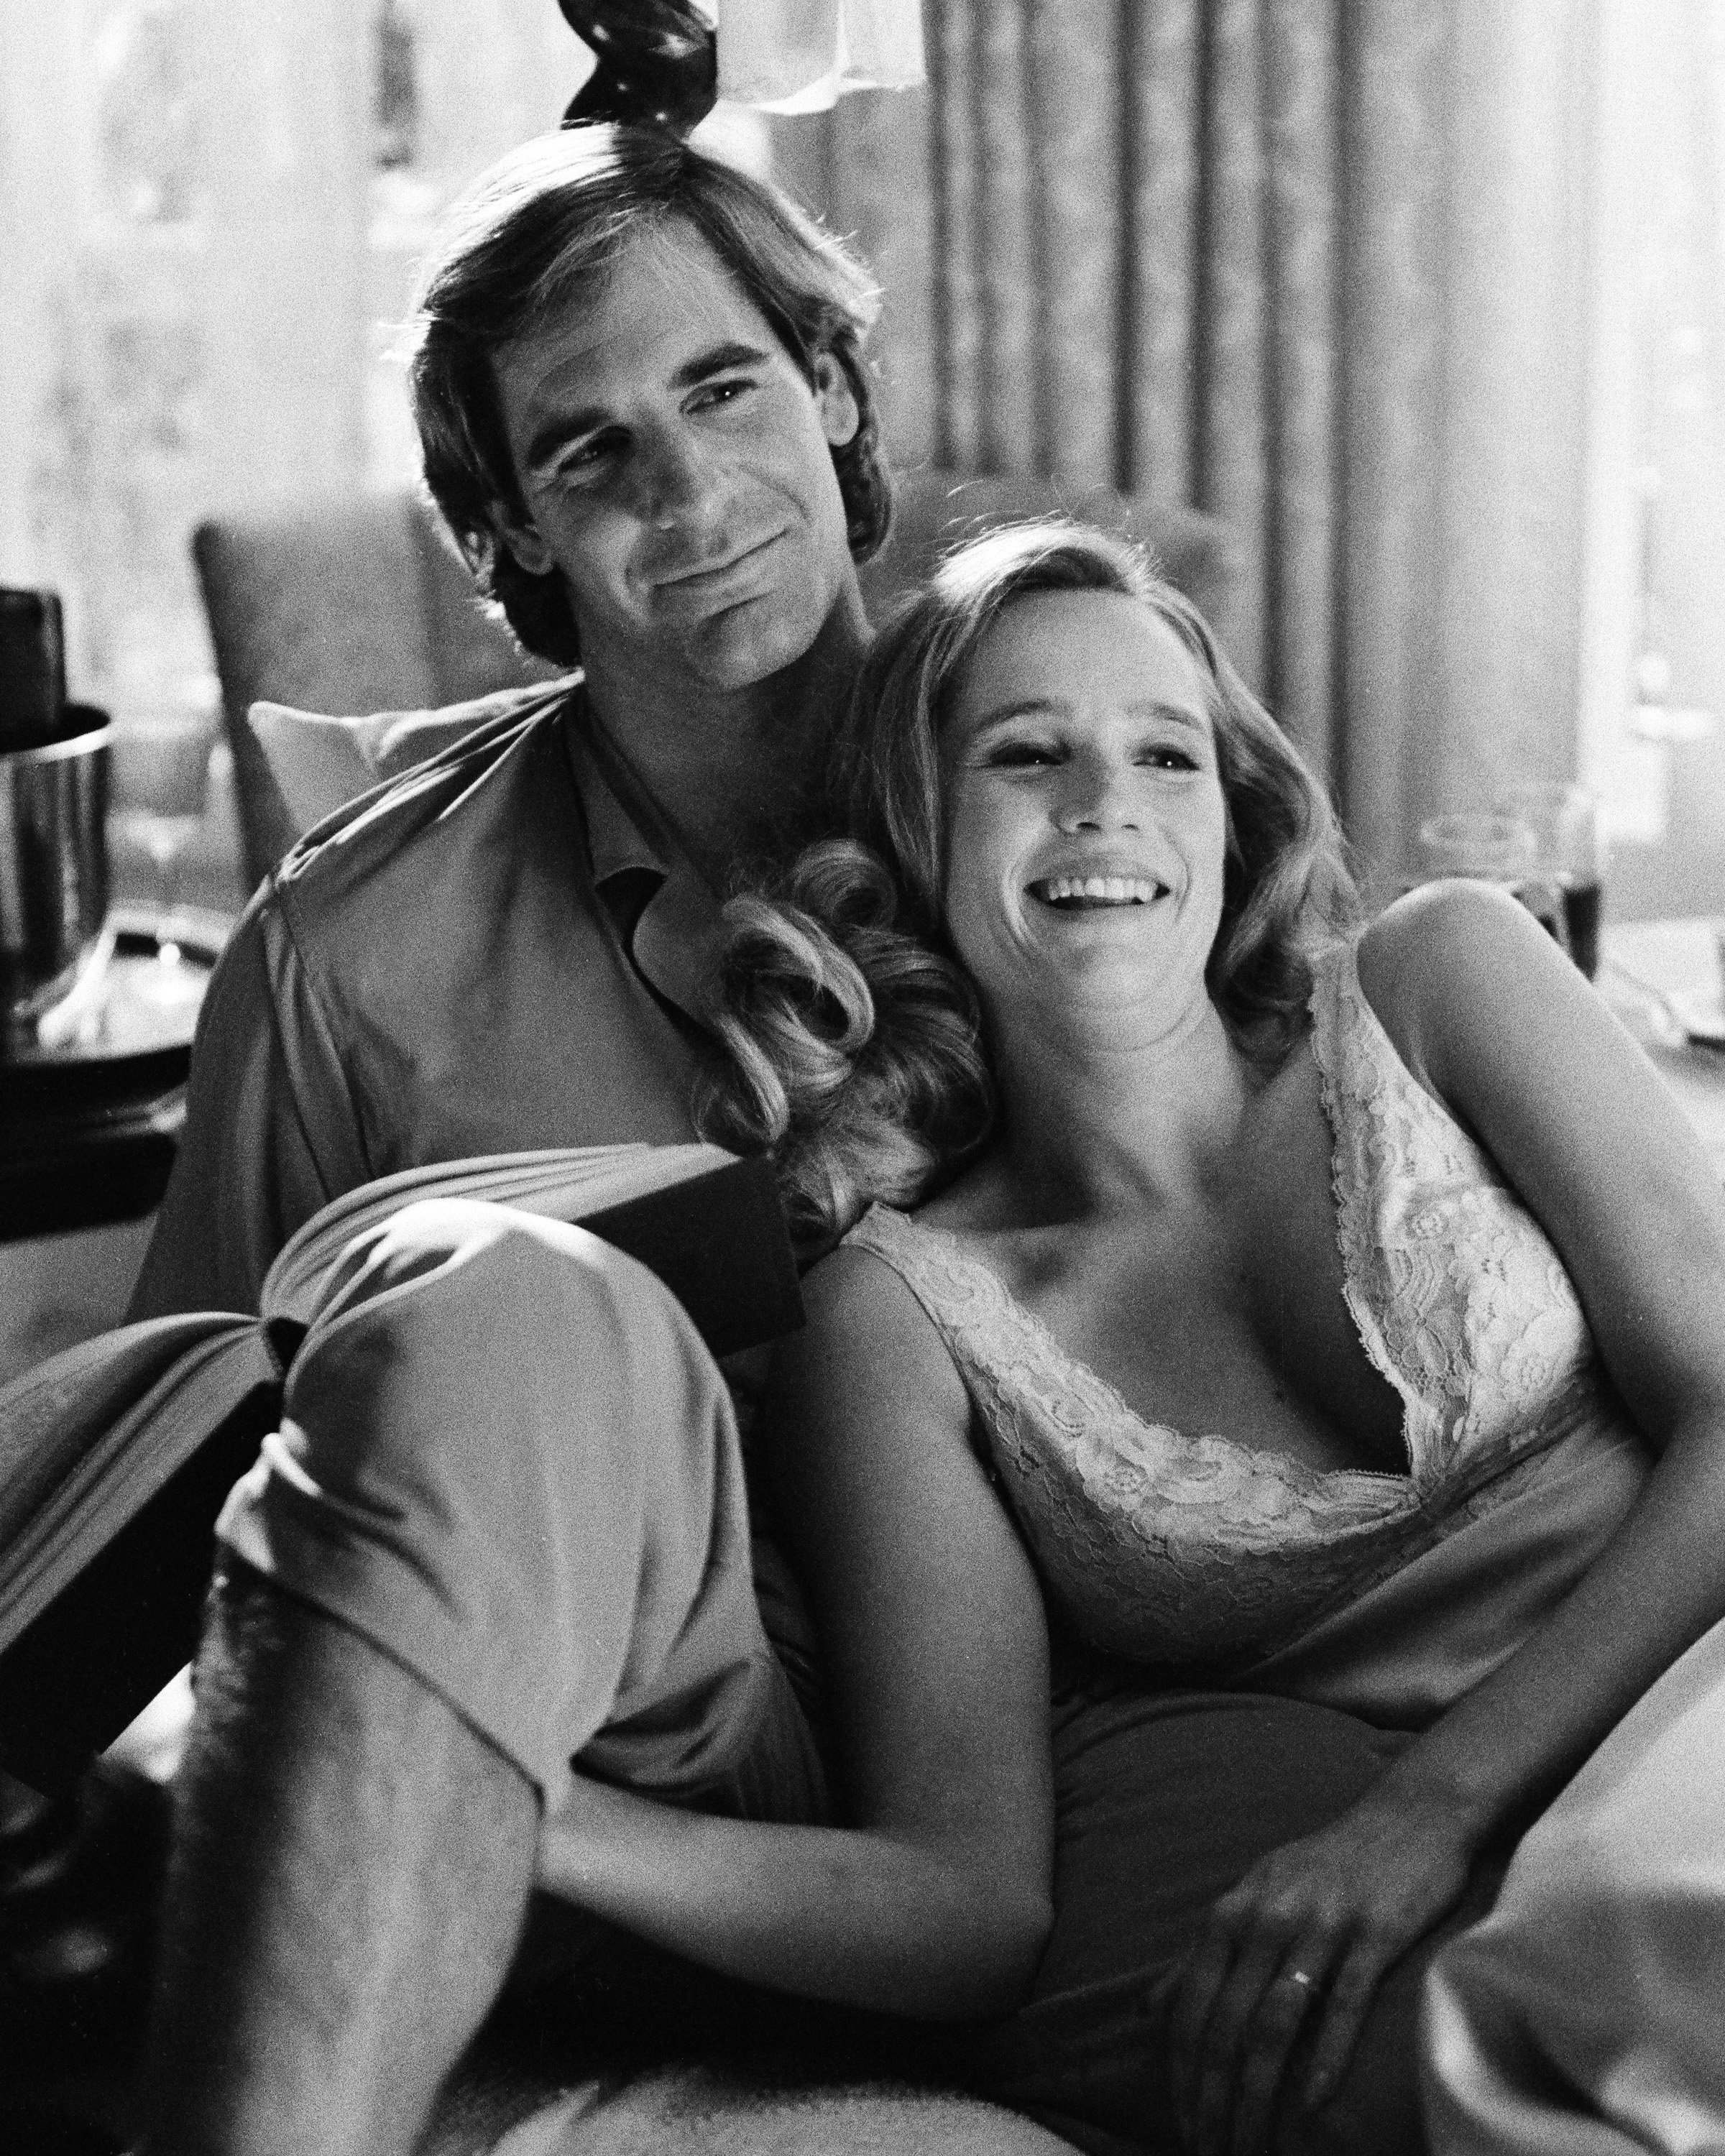 Scott Bakula played "Dr Sam" and Alice Adair played "Diane McBride" on "Quantum Leap." The picture is from the 201st episode of the series, on April 27 1960. | Source: Getty Images